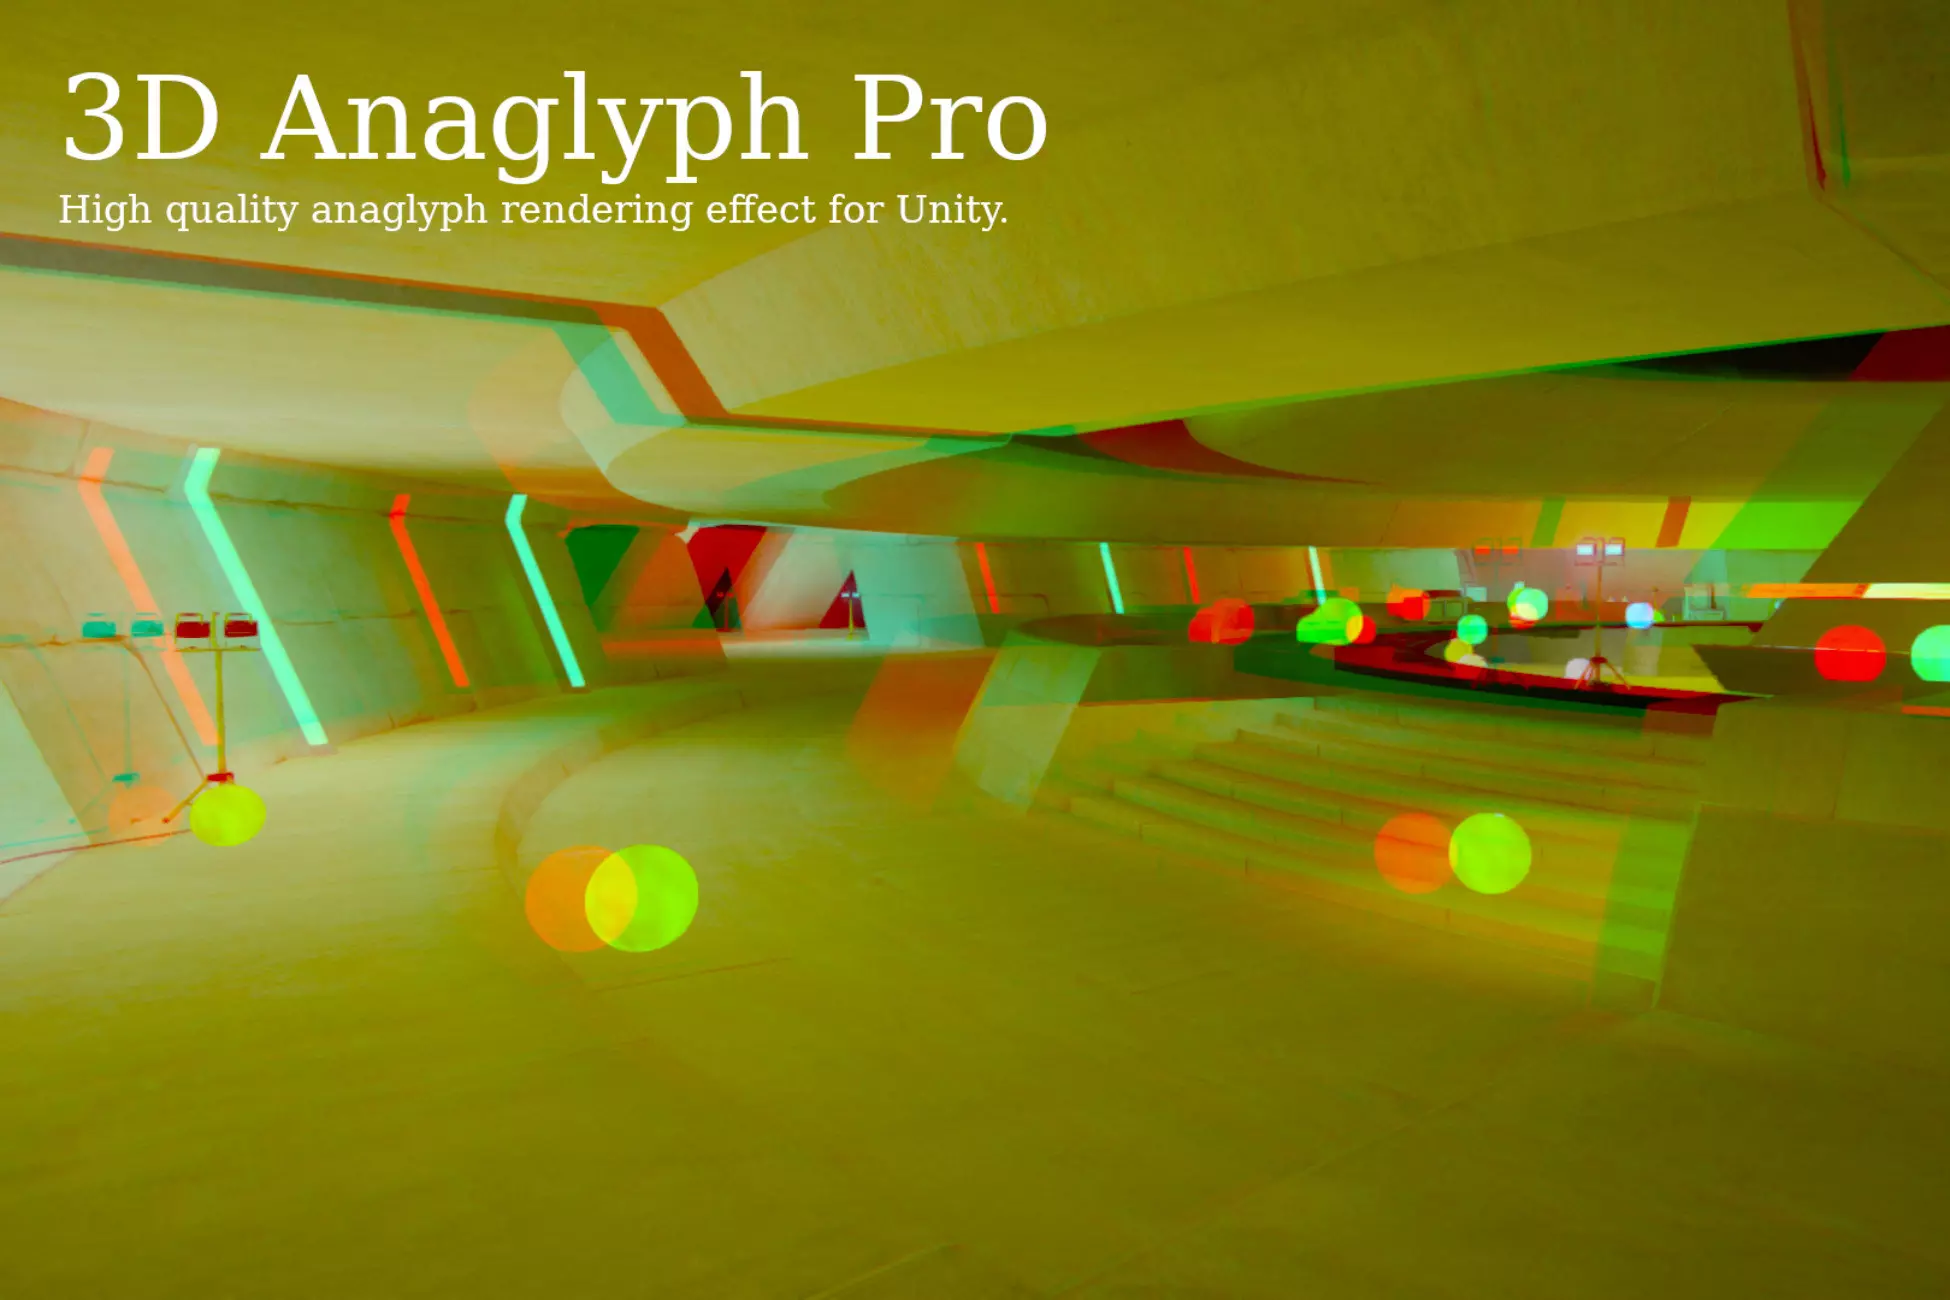 3D Anaglyph Pro